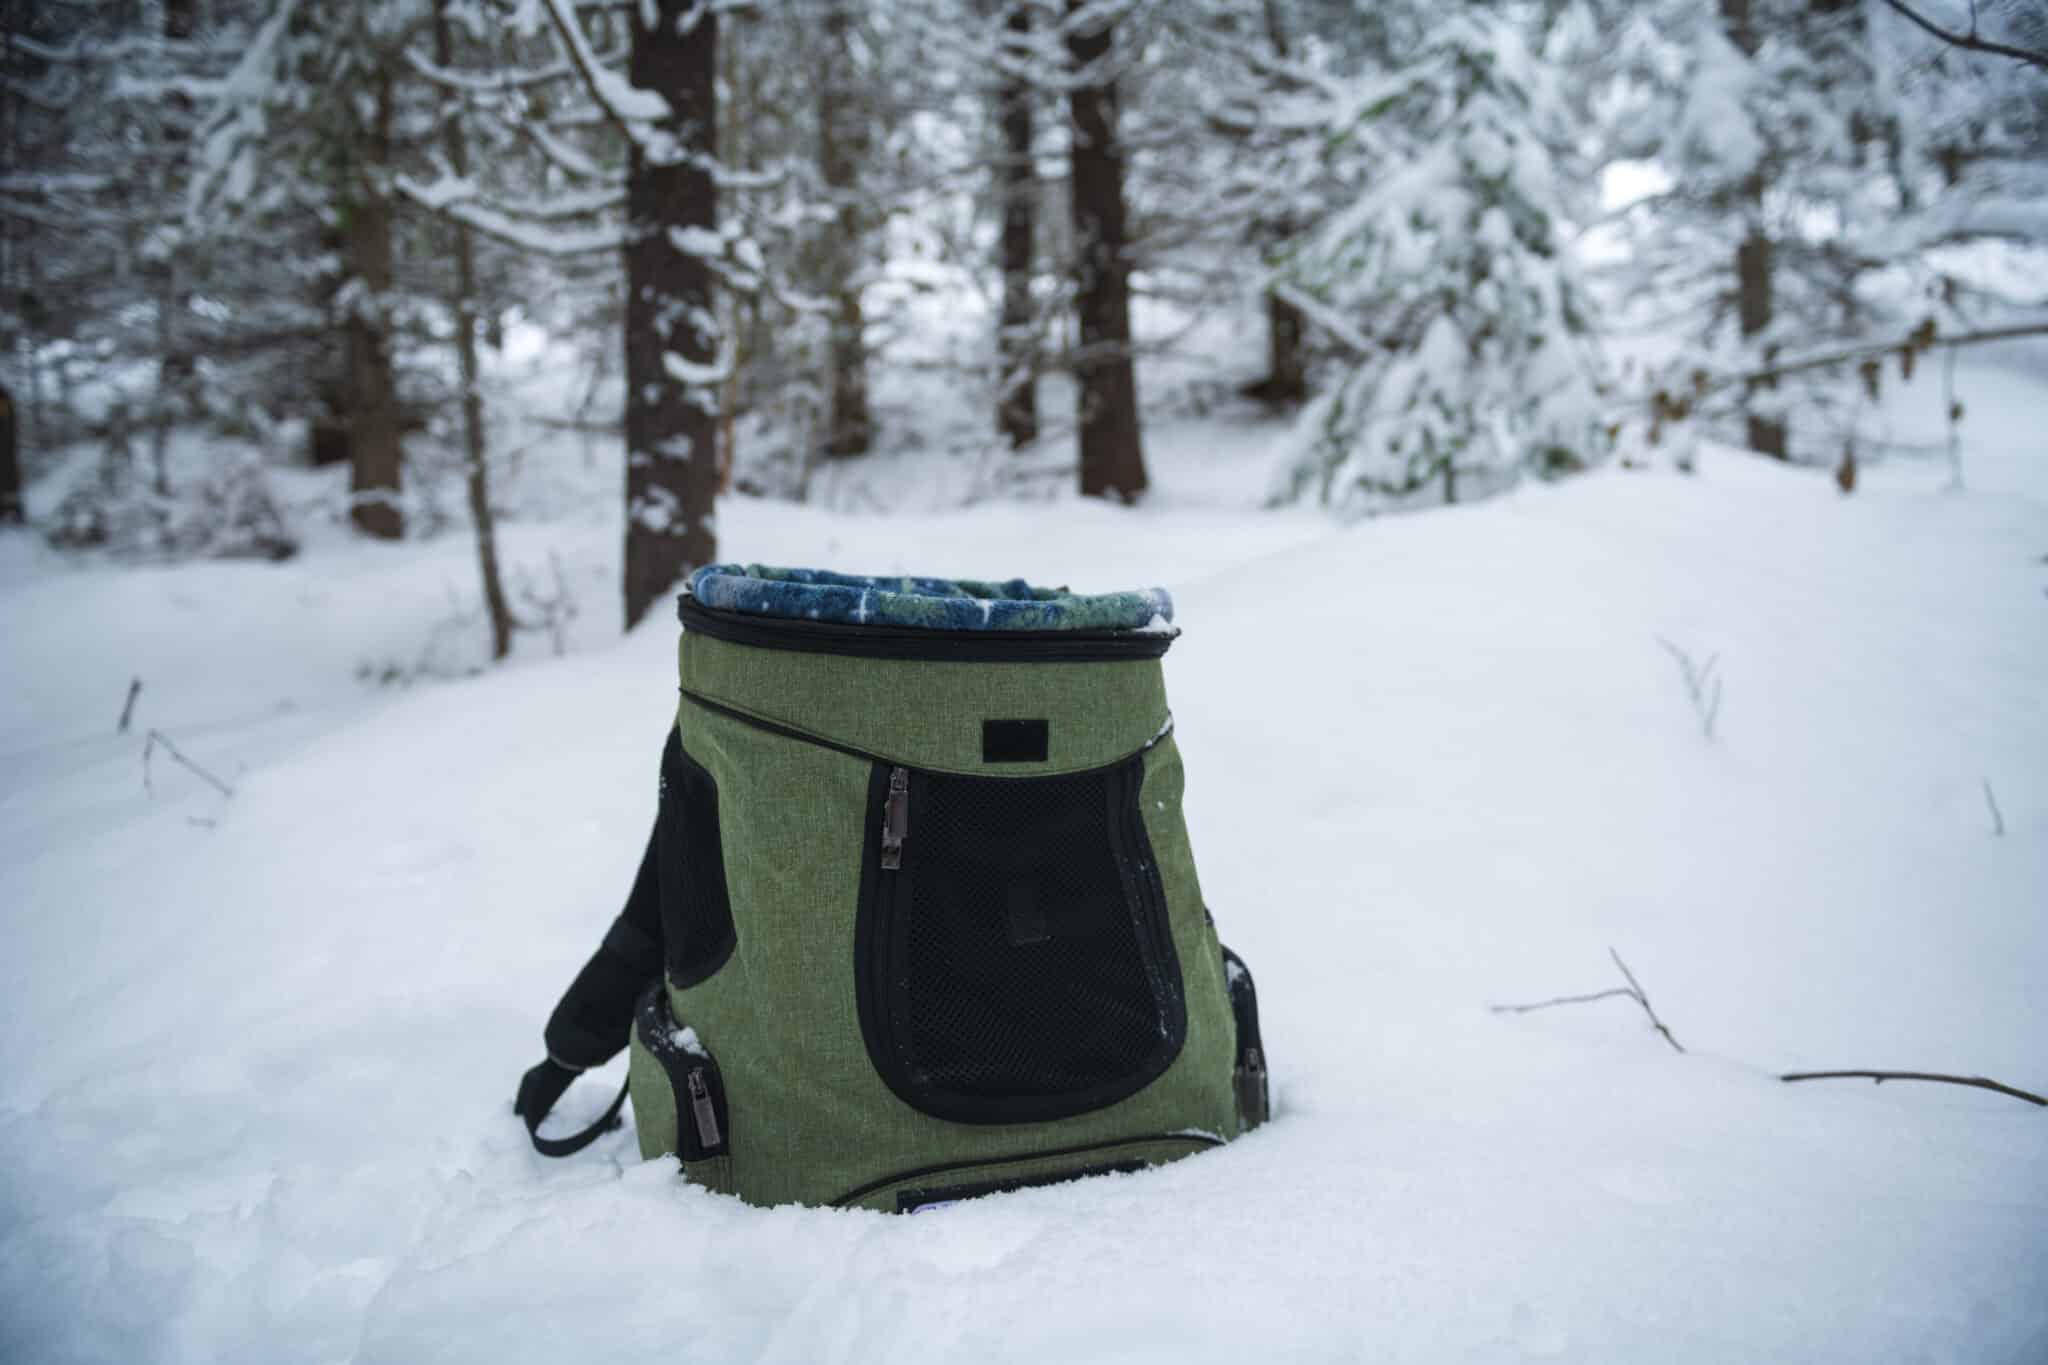 Cat Backpack Carrier sitting on the snow in the forest